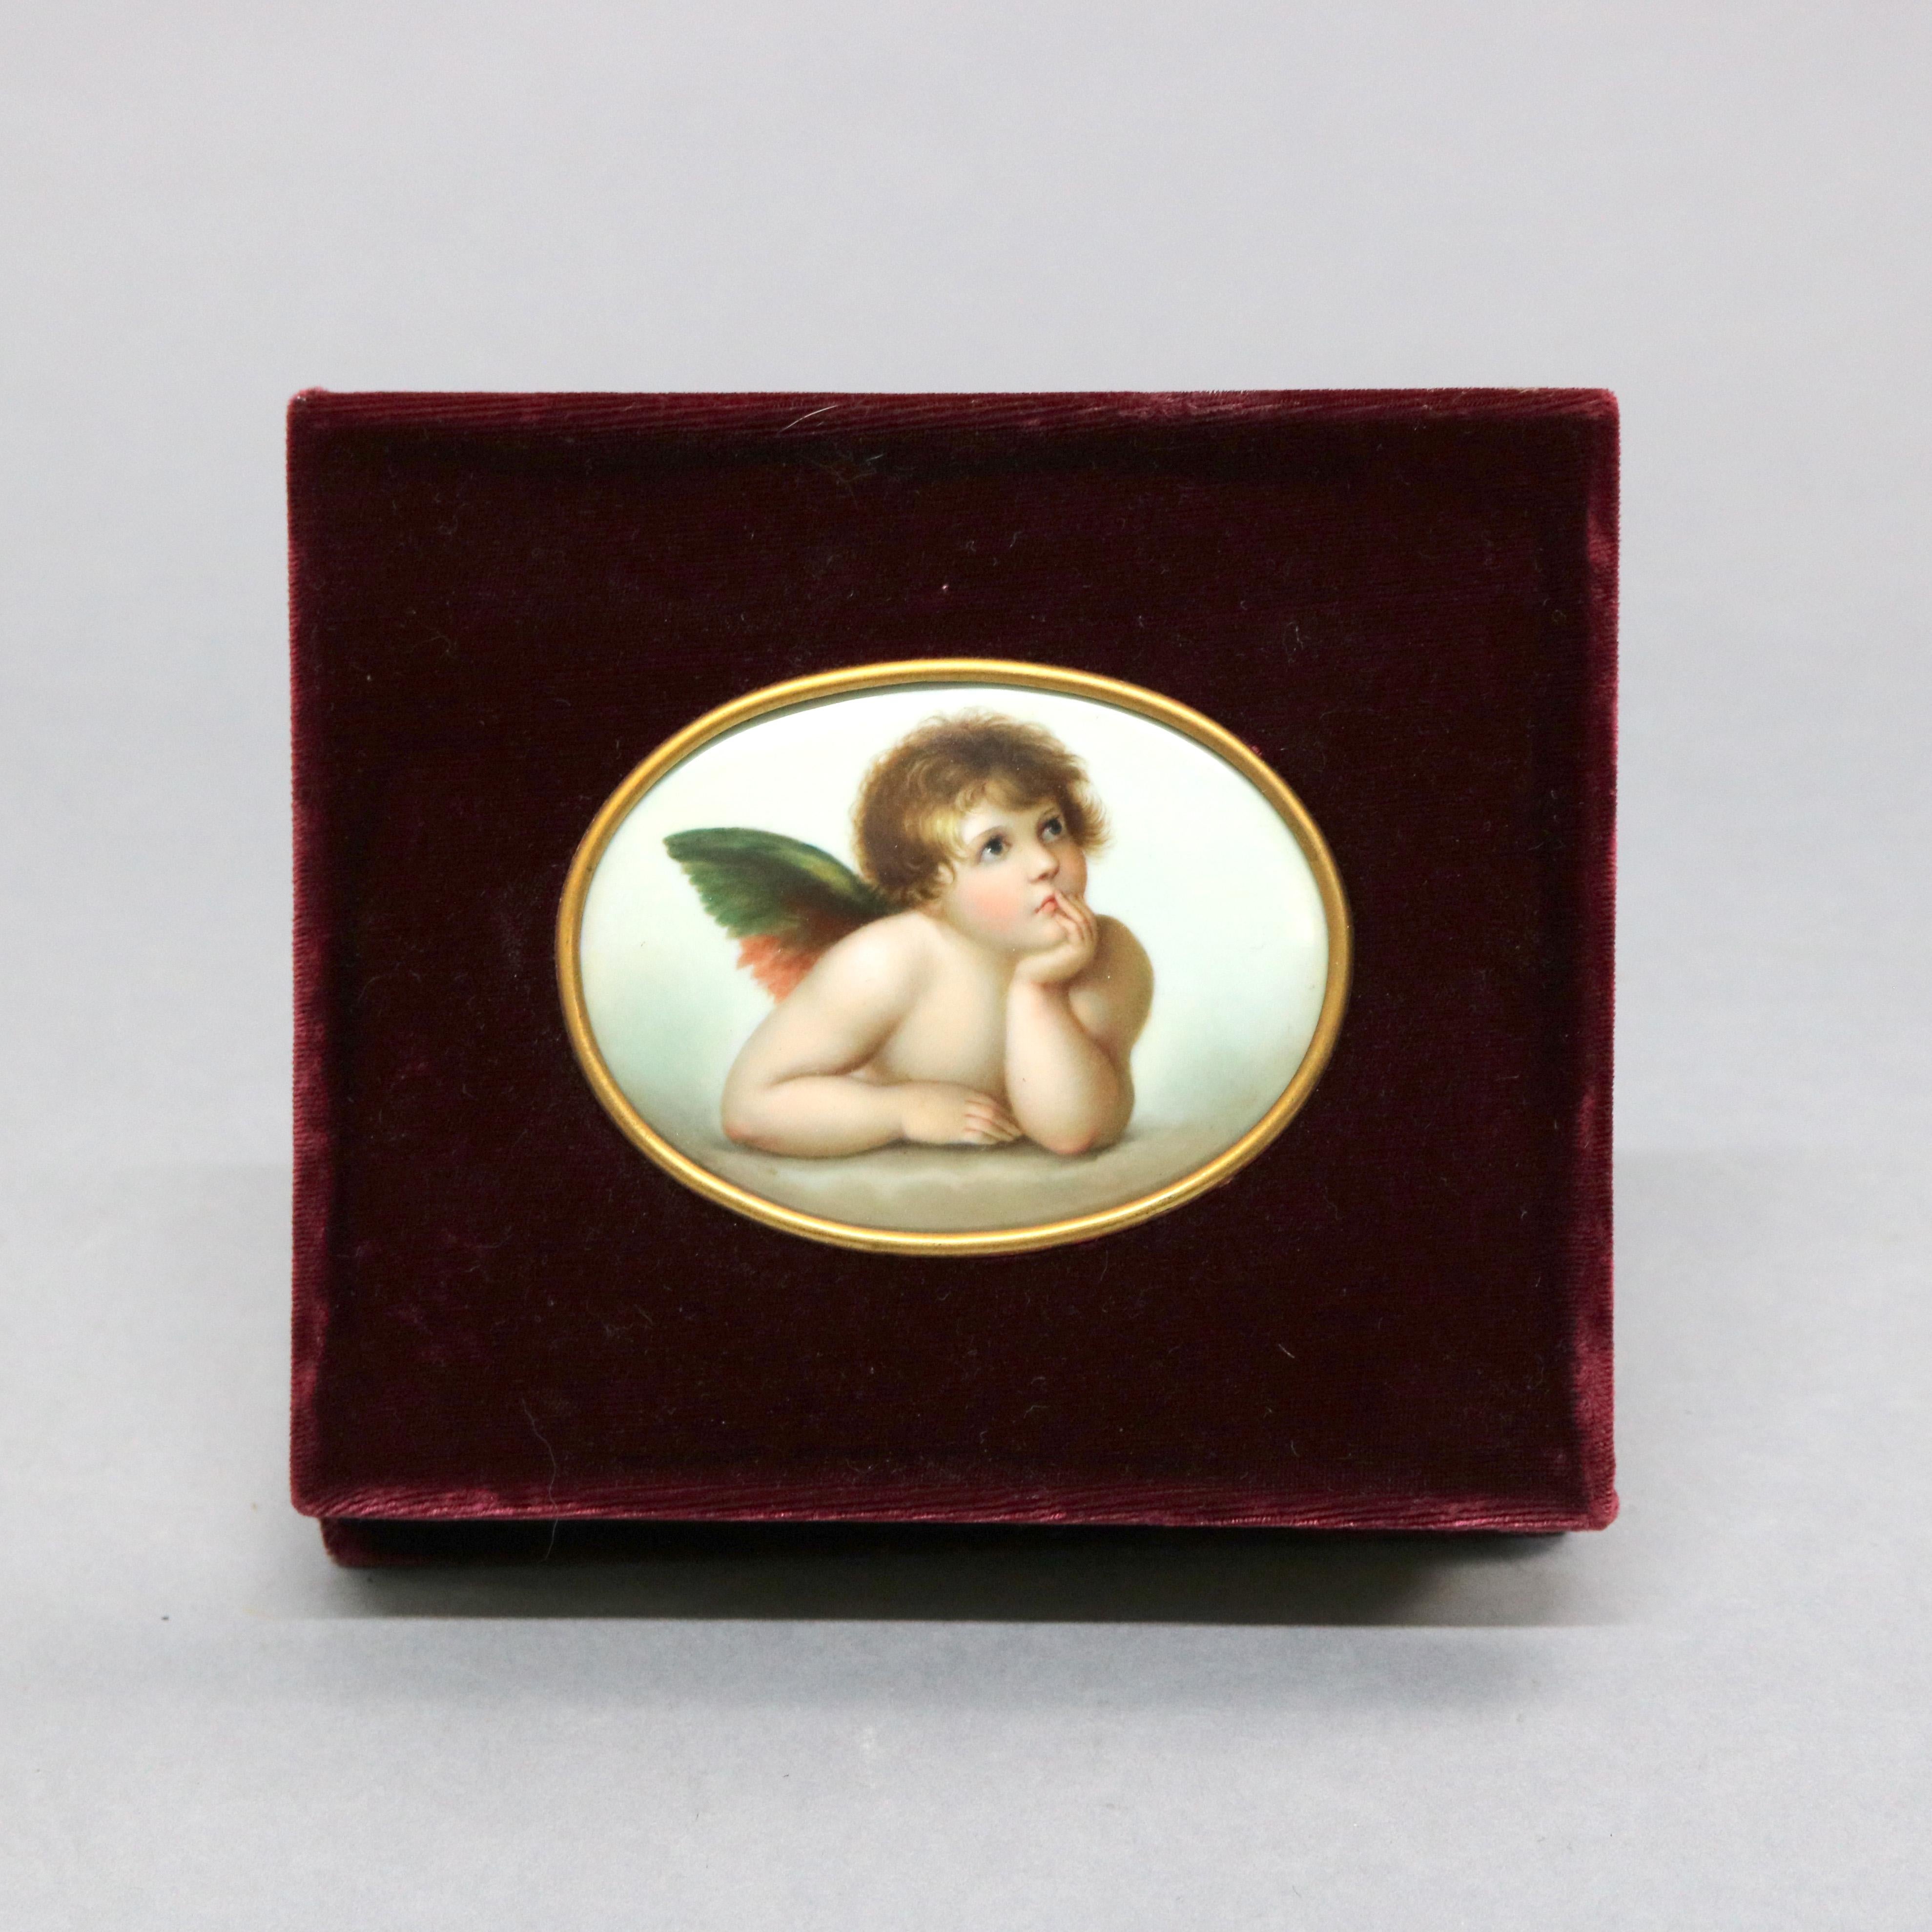 An antique pair of paintings on porcelain depict Classic winged cherubs, seated in velvet frame, 19th century

Measures: 12